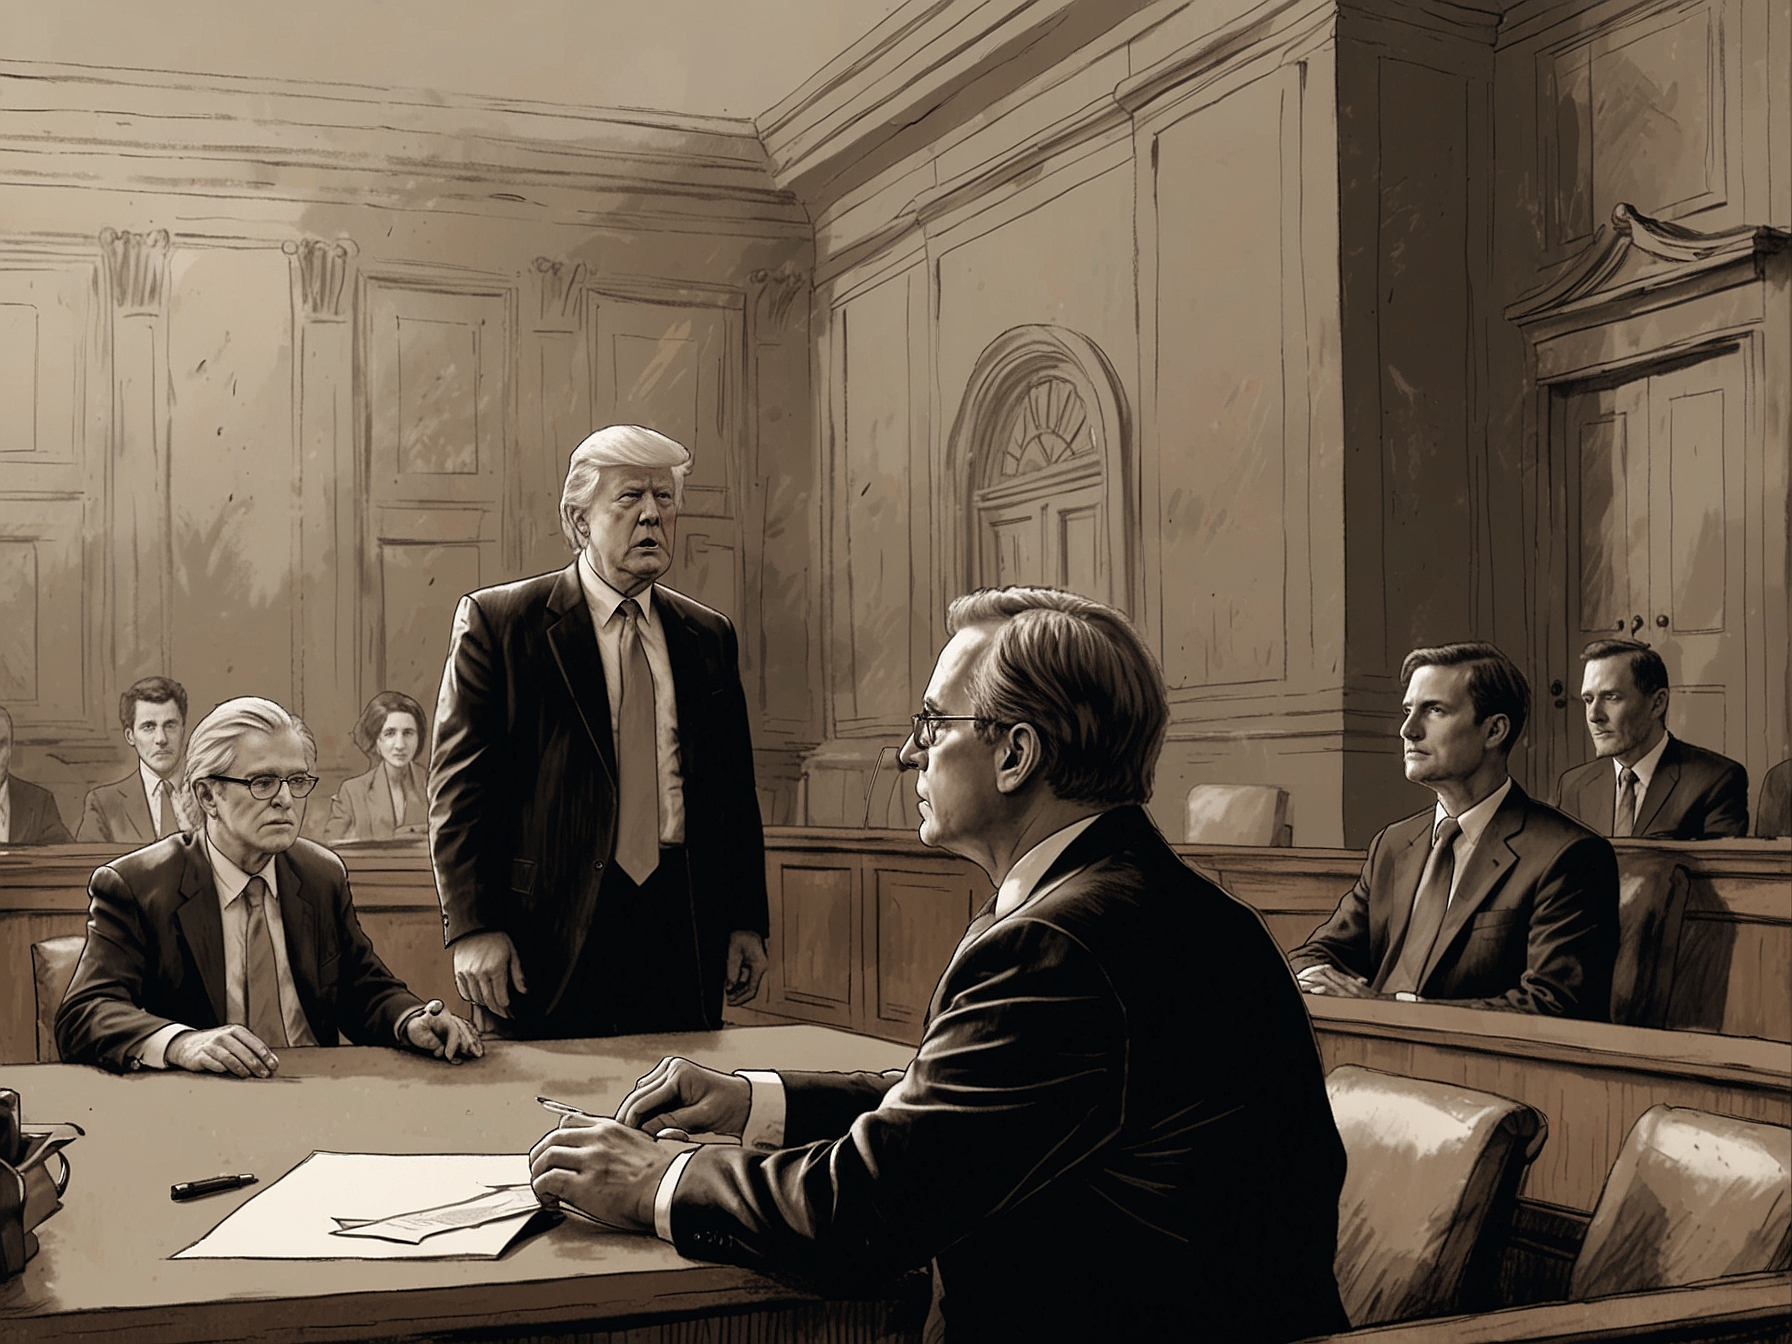 A courtroom scene depicting lawyers debating a gag order, reflecting the legal battle between protecting judicial integrity and upholding free speech for high-profile individuals like Trump.